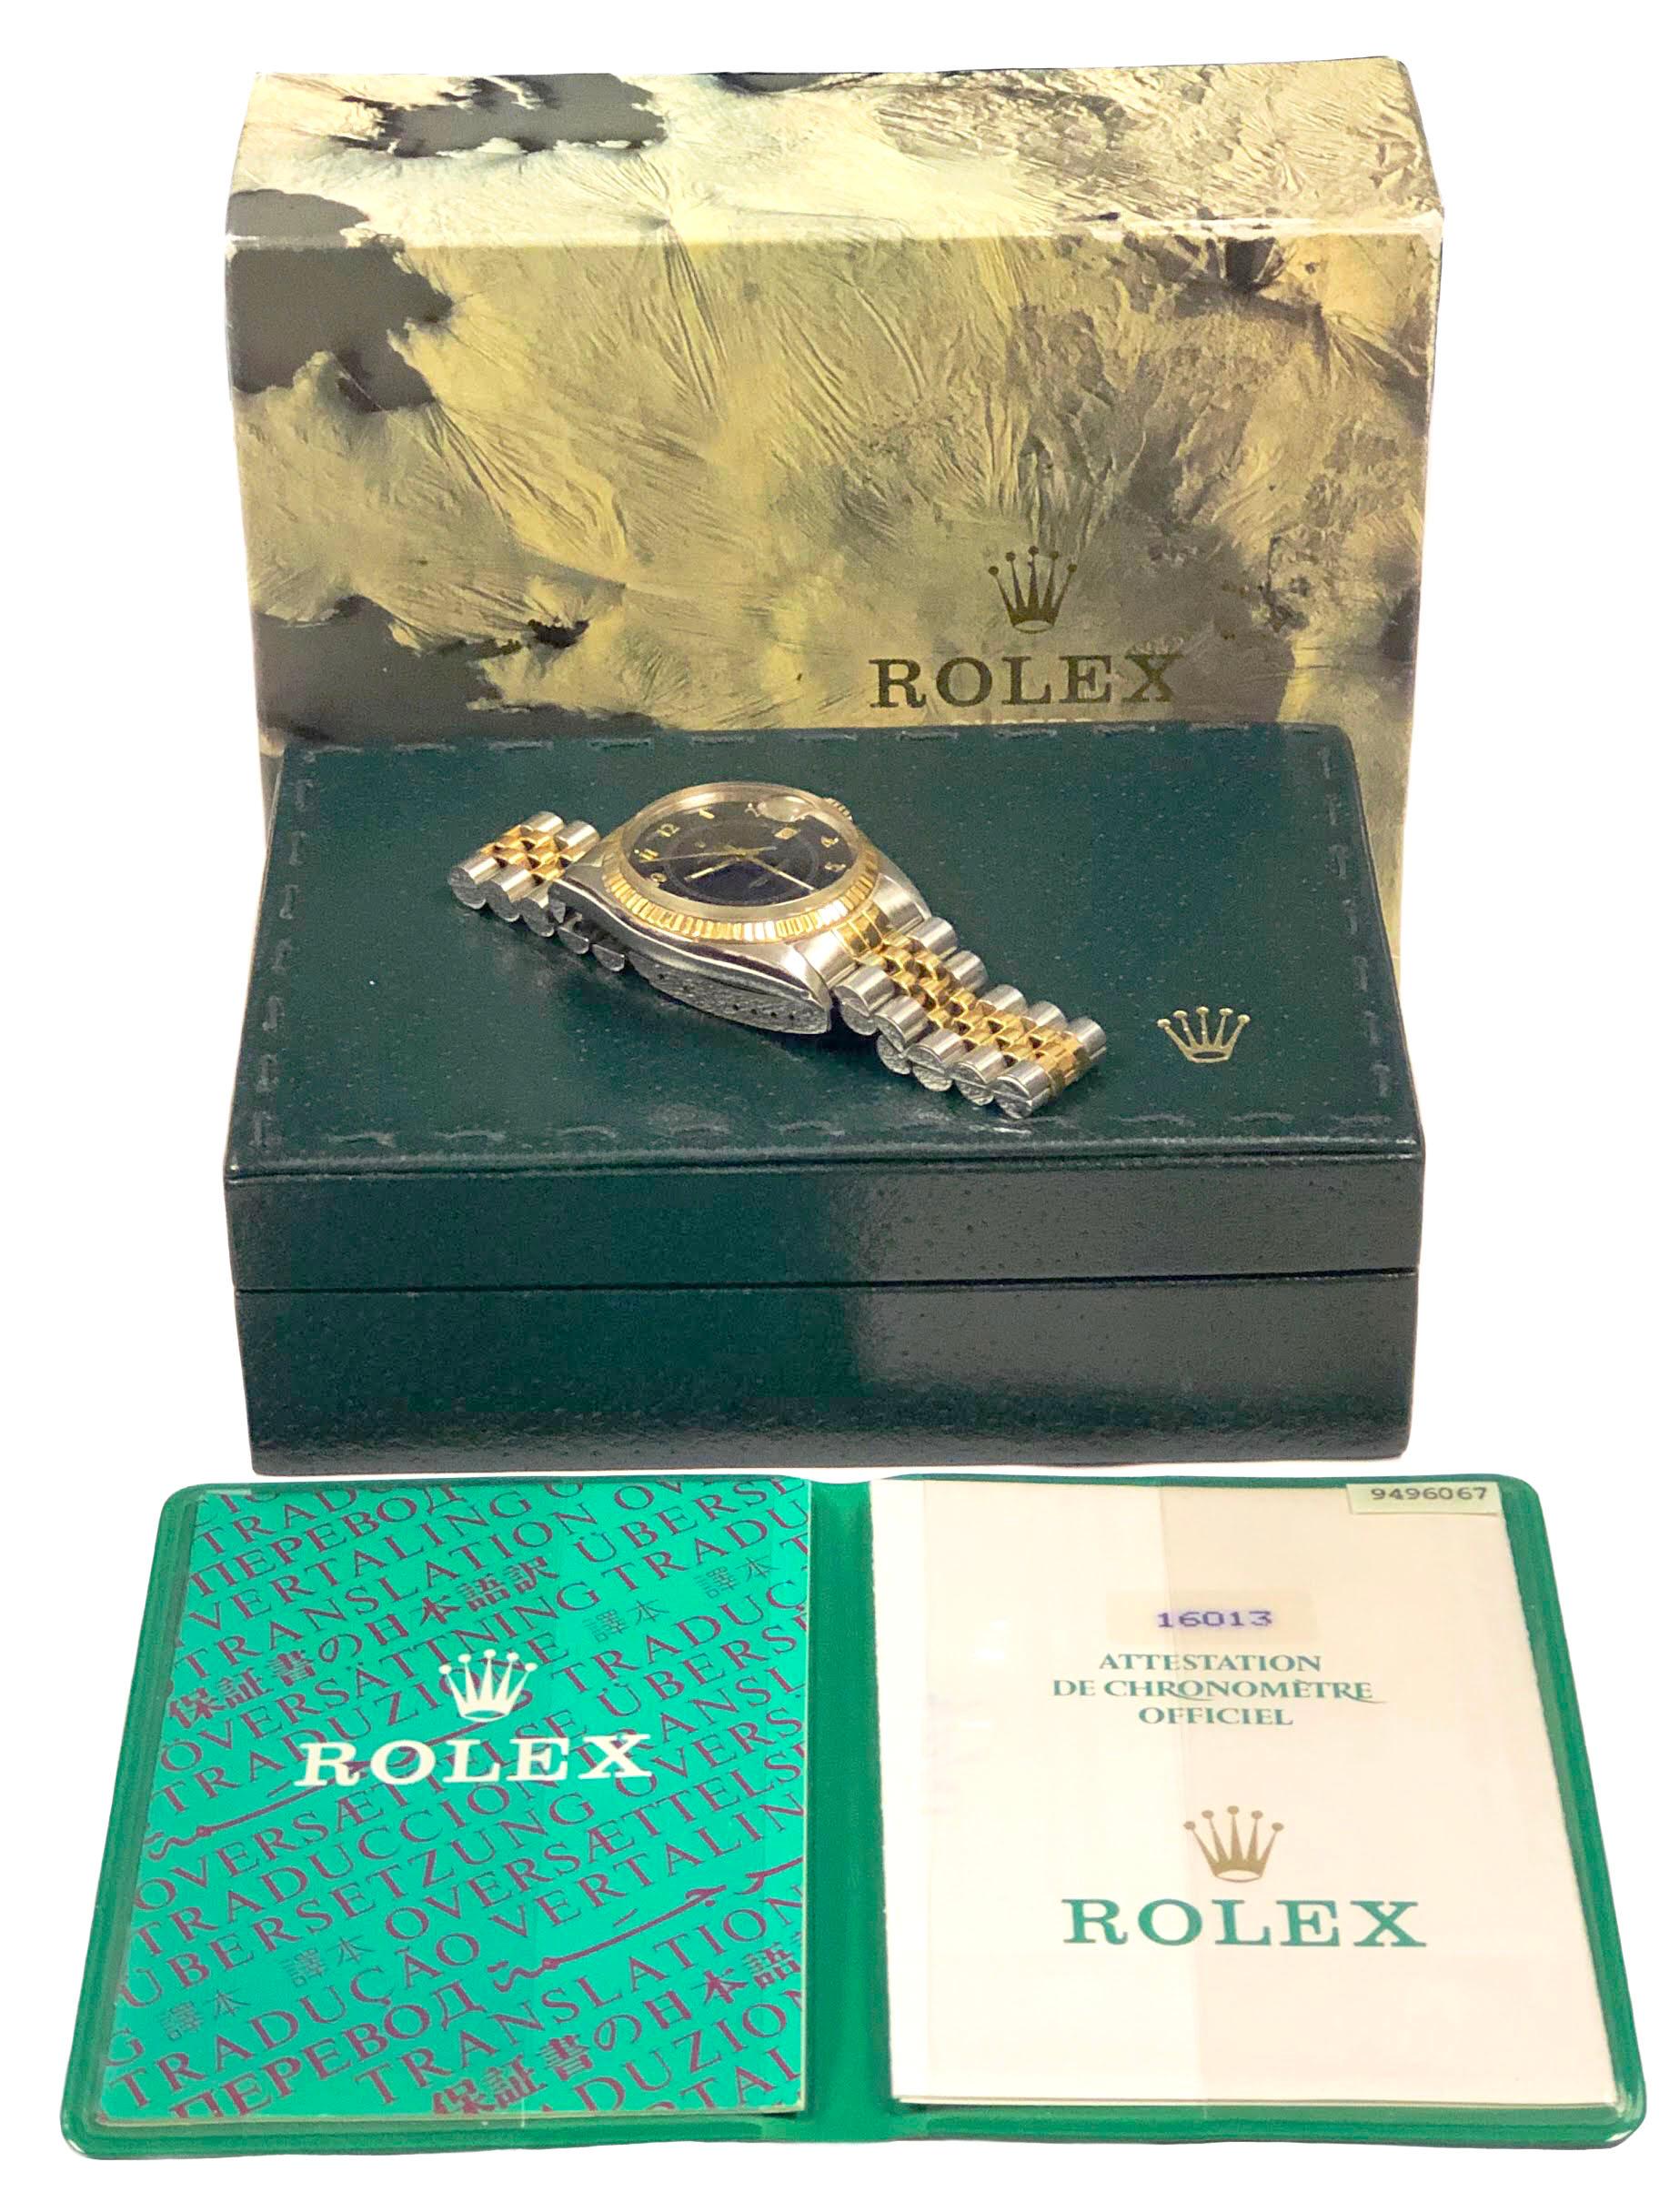 Rolex 1987 18k Steel Datejust Blue Boiler Guage Dial and Rare Box, Complete Set 1